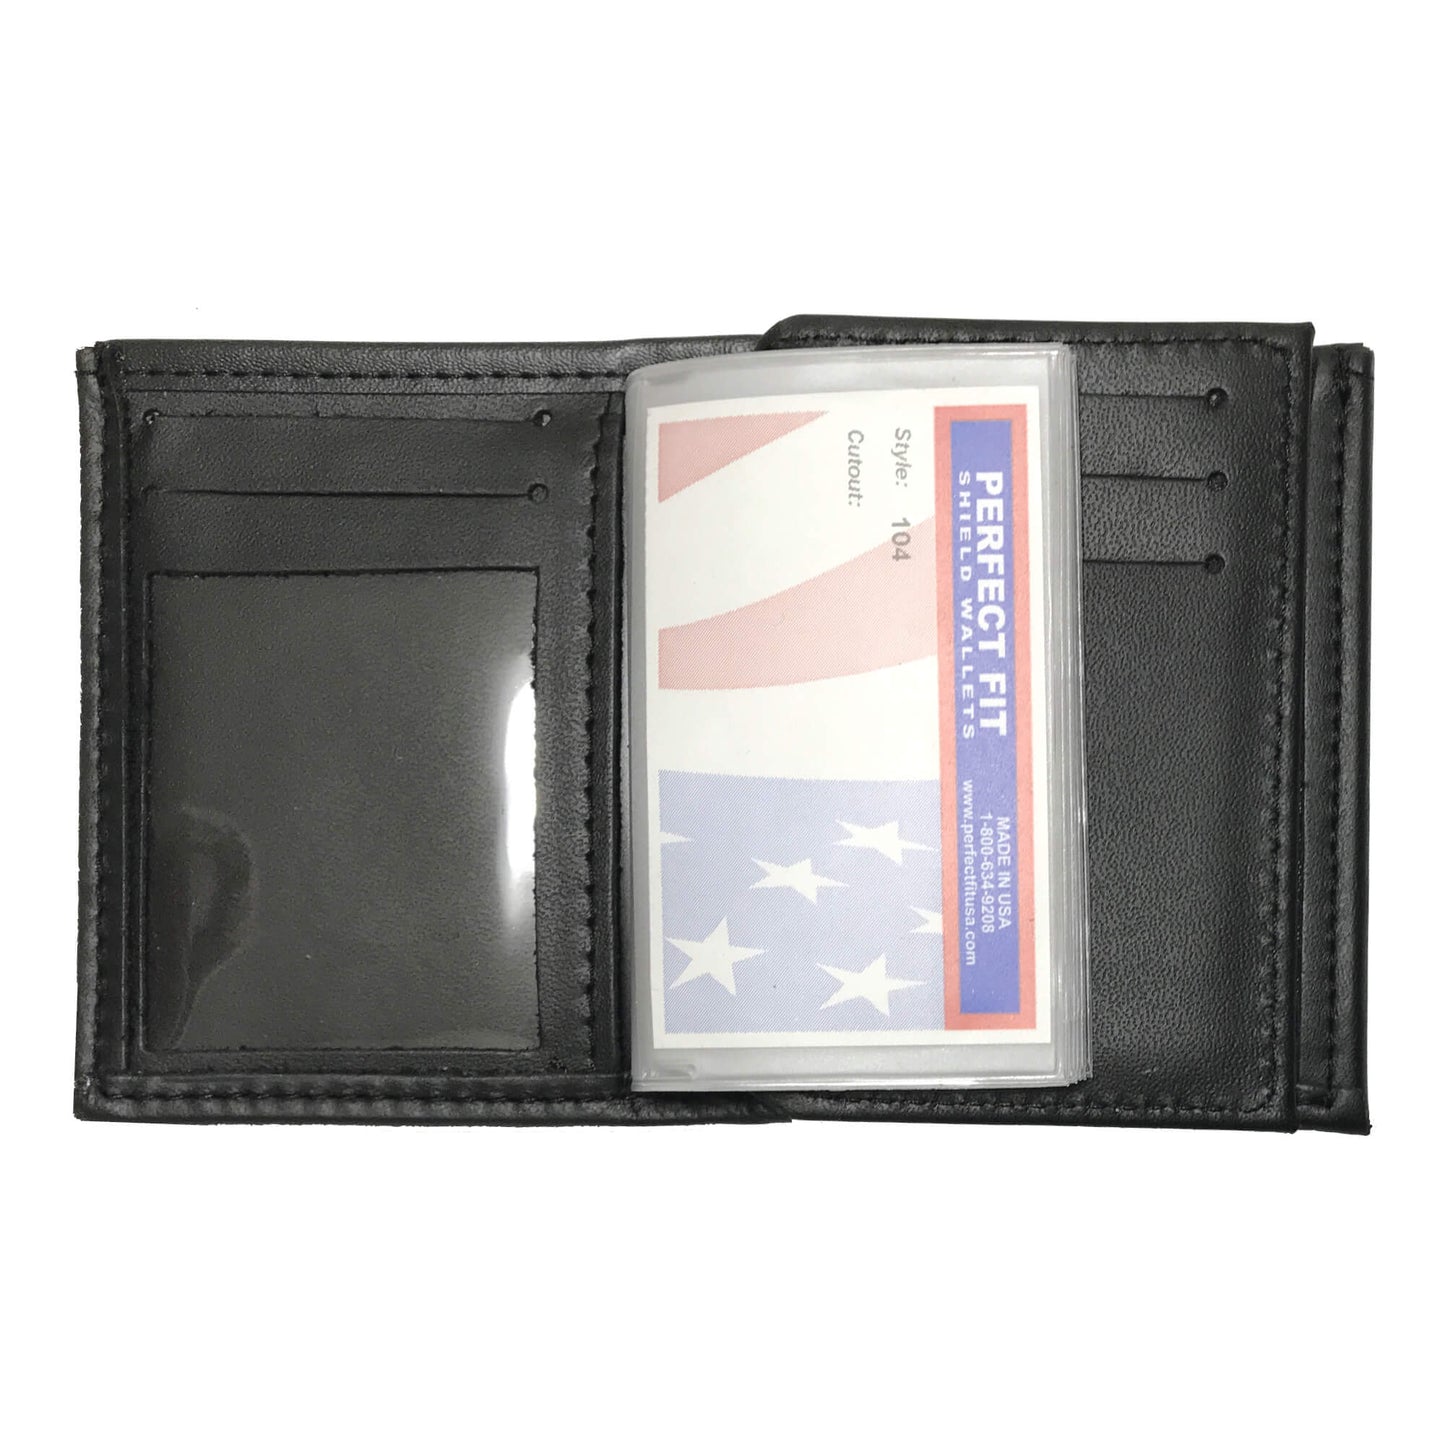 U.S. Federal Protective Service - FPS (3in) Bifold Hidden Badge Wallet-Perfect Fit-911 Duty Gear USA